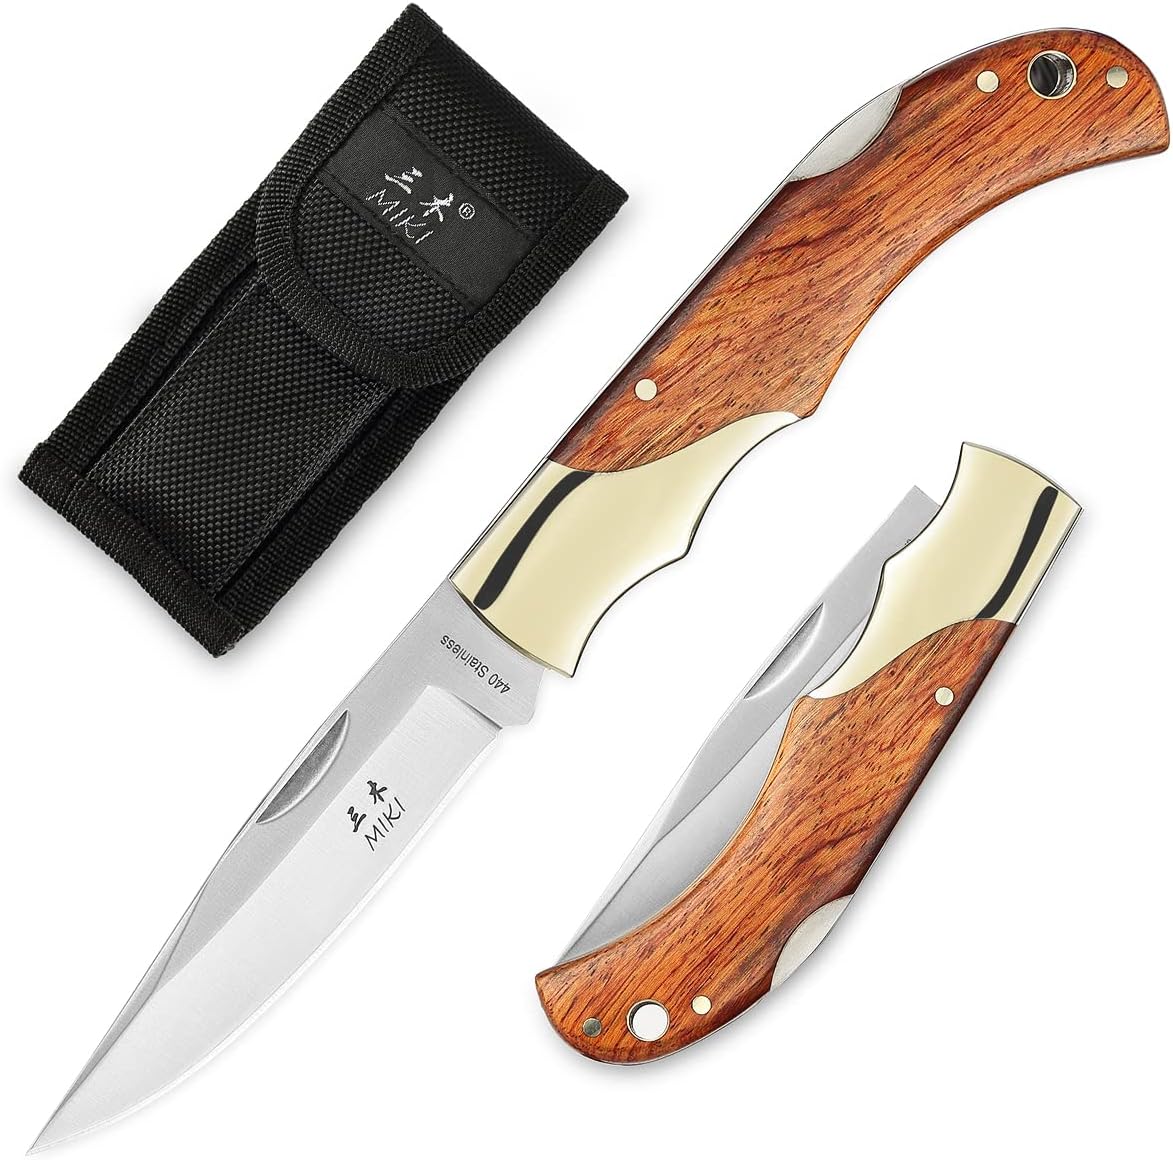 KD Pocket Folding Knife Stainless Steel Outdoor camping hiking fishing